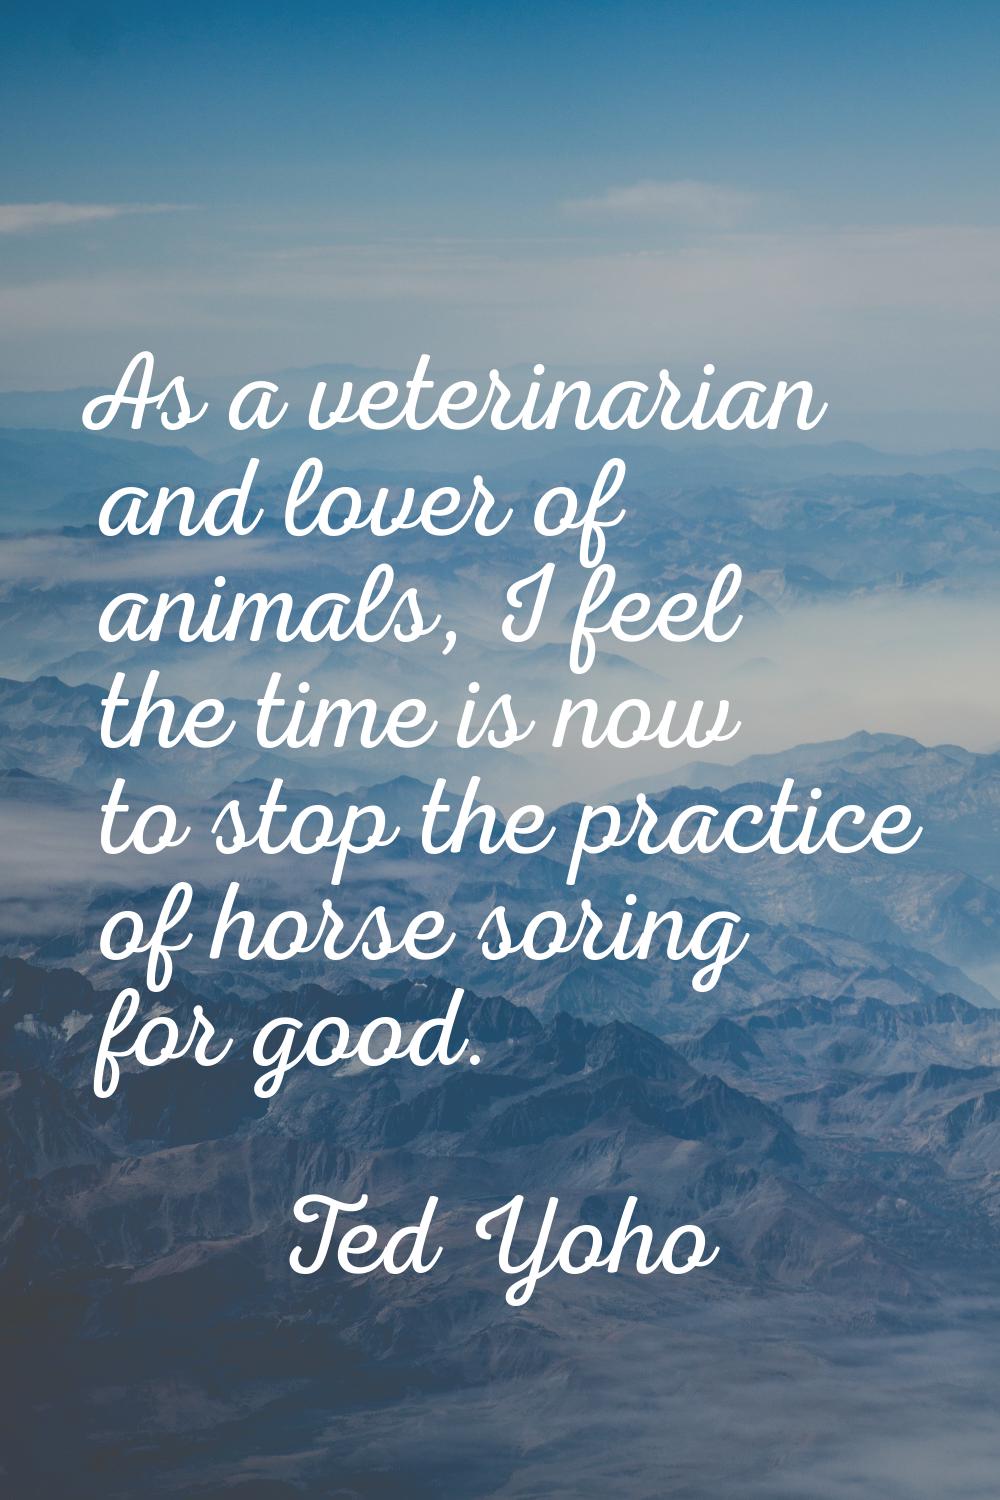 As a veterinarian and lover of animals, I feel the time is now to stop the practice of horse soring